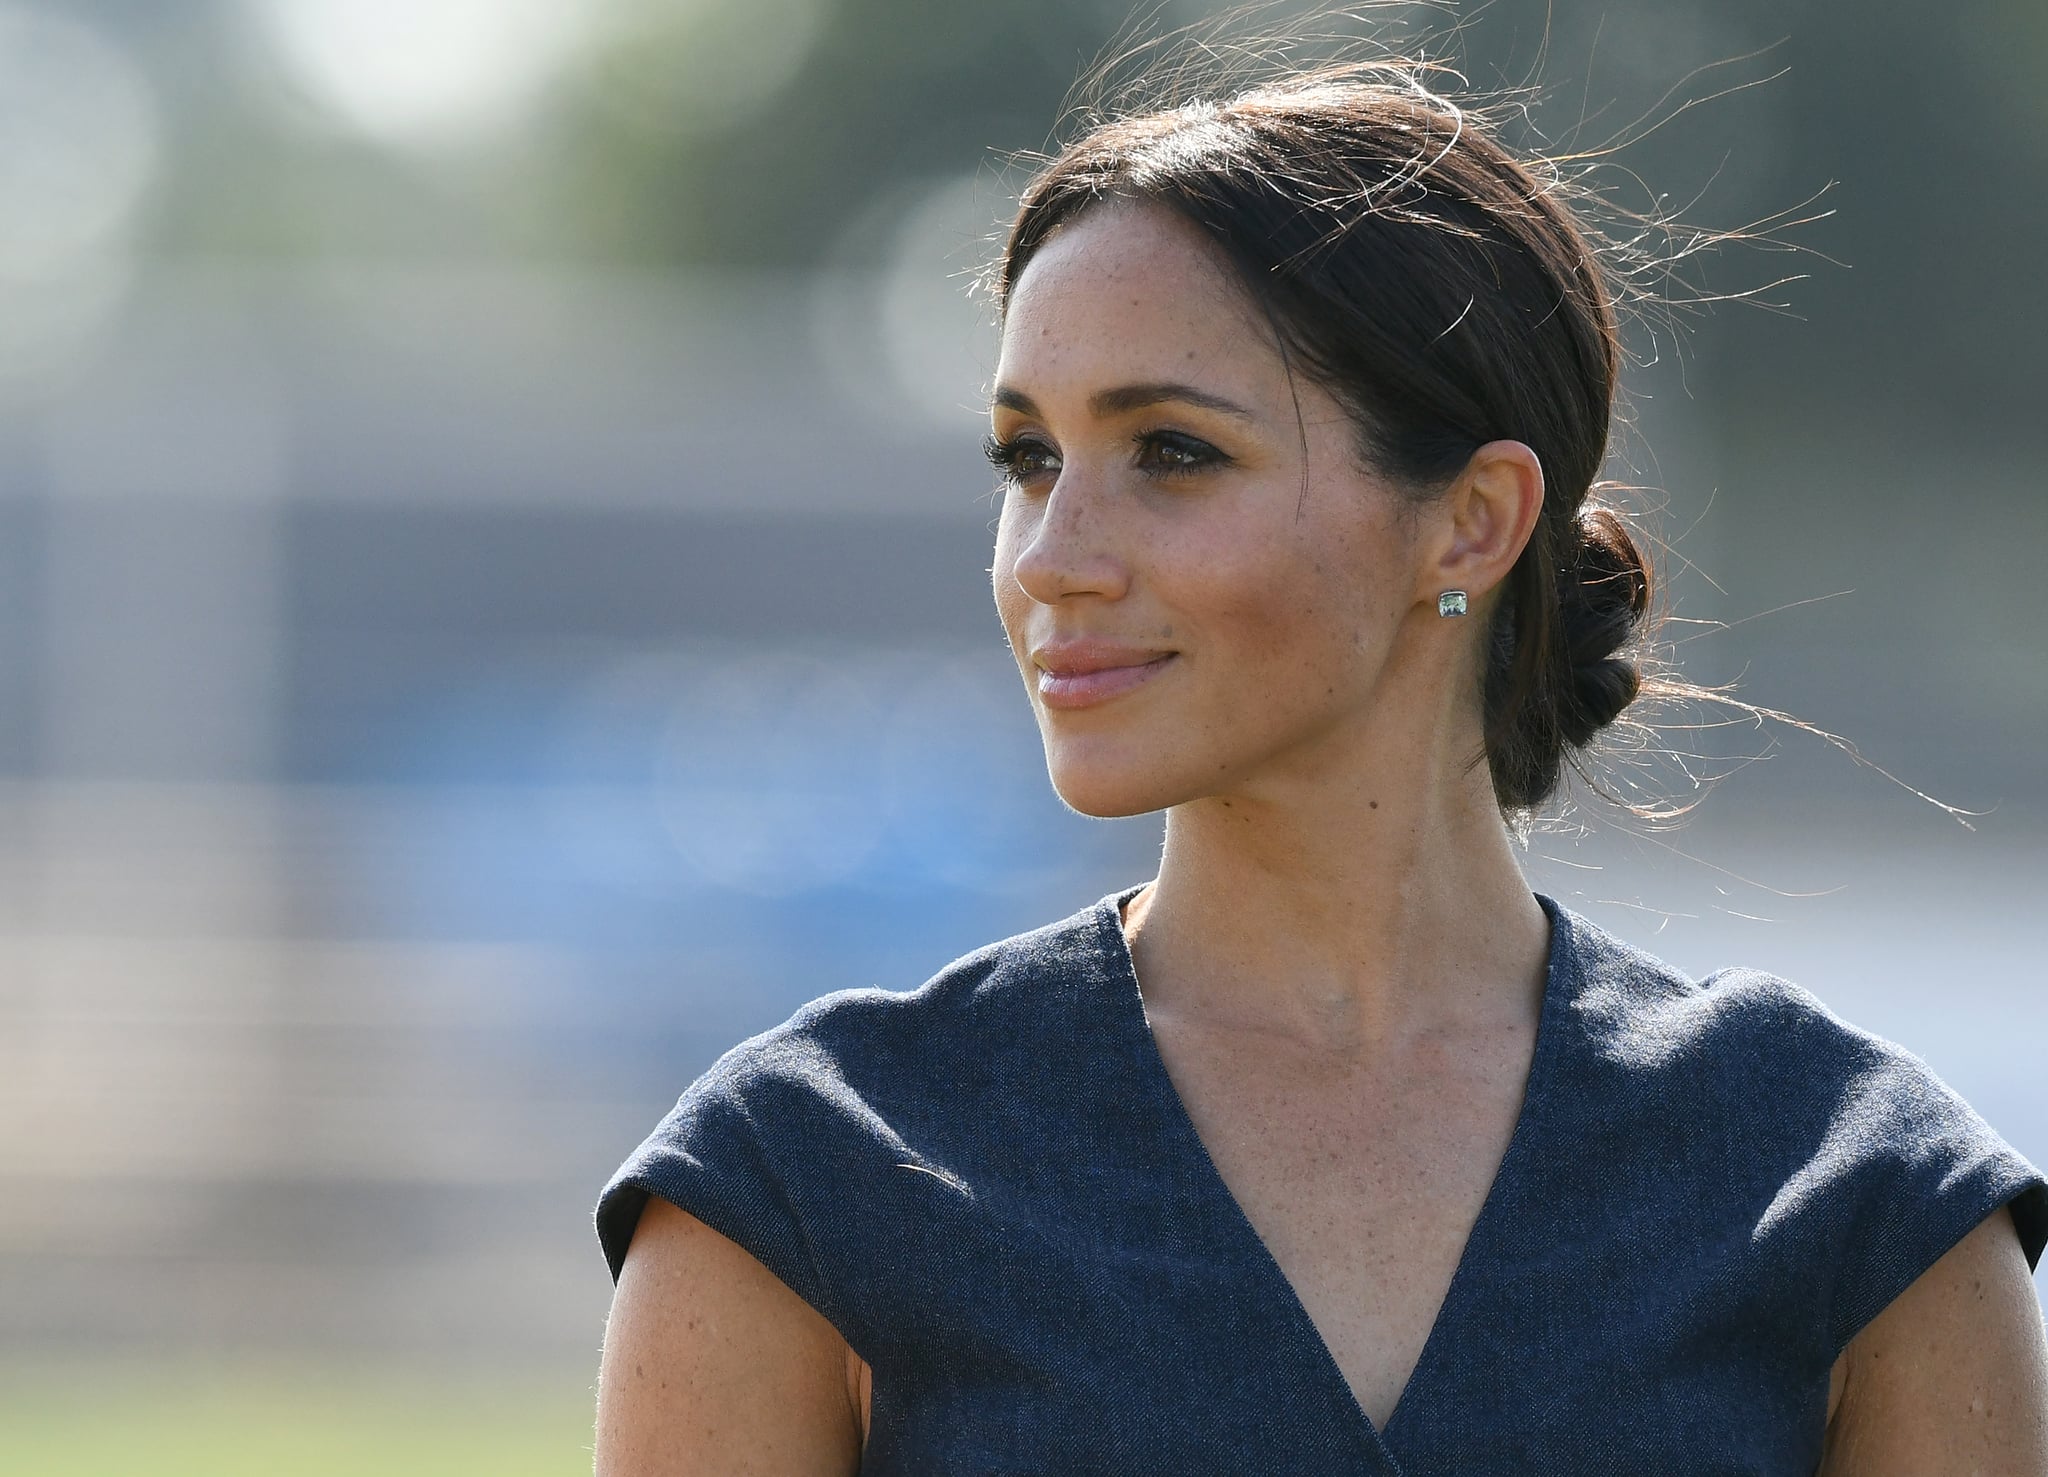 WINDSOR,  UNITED KINGDOM - JULY 26:  Meghan, Duchess of Sussex  attends the Sentebale ISPS Handa Polo Cup at the Royal County of Berkshire Polo Club on July 26, 2018 in Windsor, England. (Photo by Anwar Hussein/WireImage)